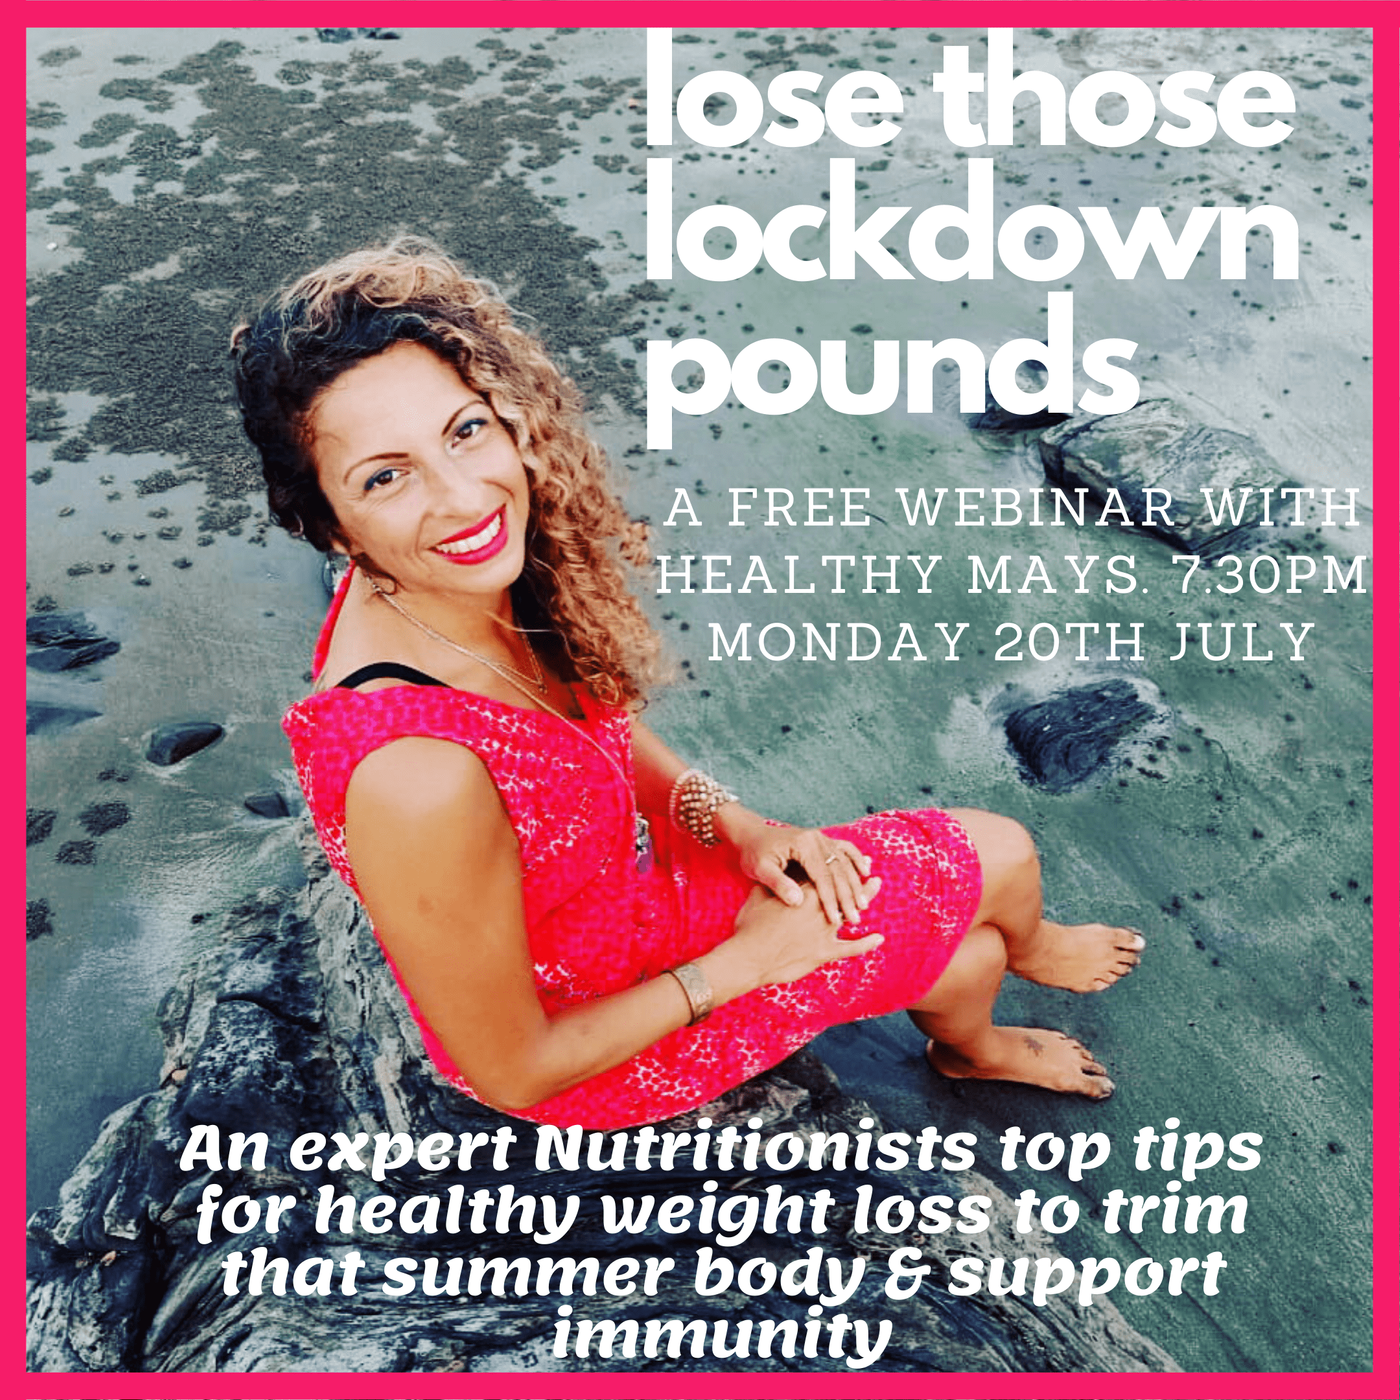 Do you feel that those lockdown pounds have piled on? Then this free 45min Nutrition webinar & q&a with a registered nutritionist is just for you.

Especially now as research shows that maintaining a healthy weight is so important to support our immune system.

Monday 20th July @7.30pm

Sign up here: https://bua.fit/class/UHKEPEUbCUpf